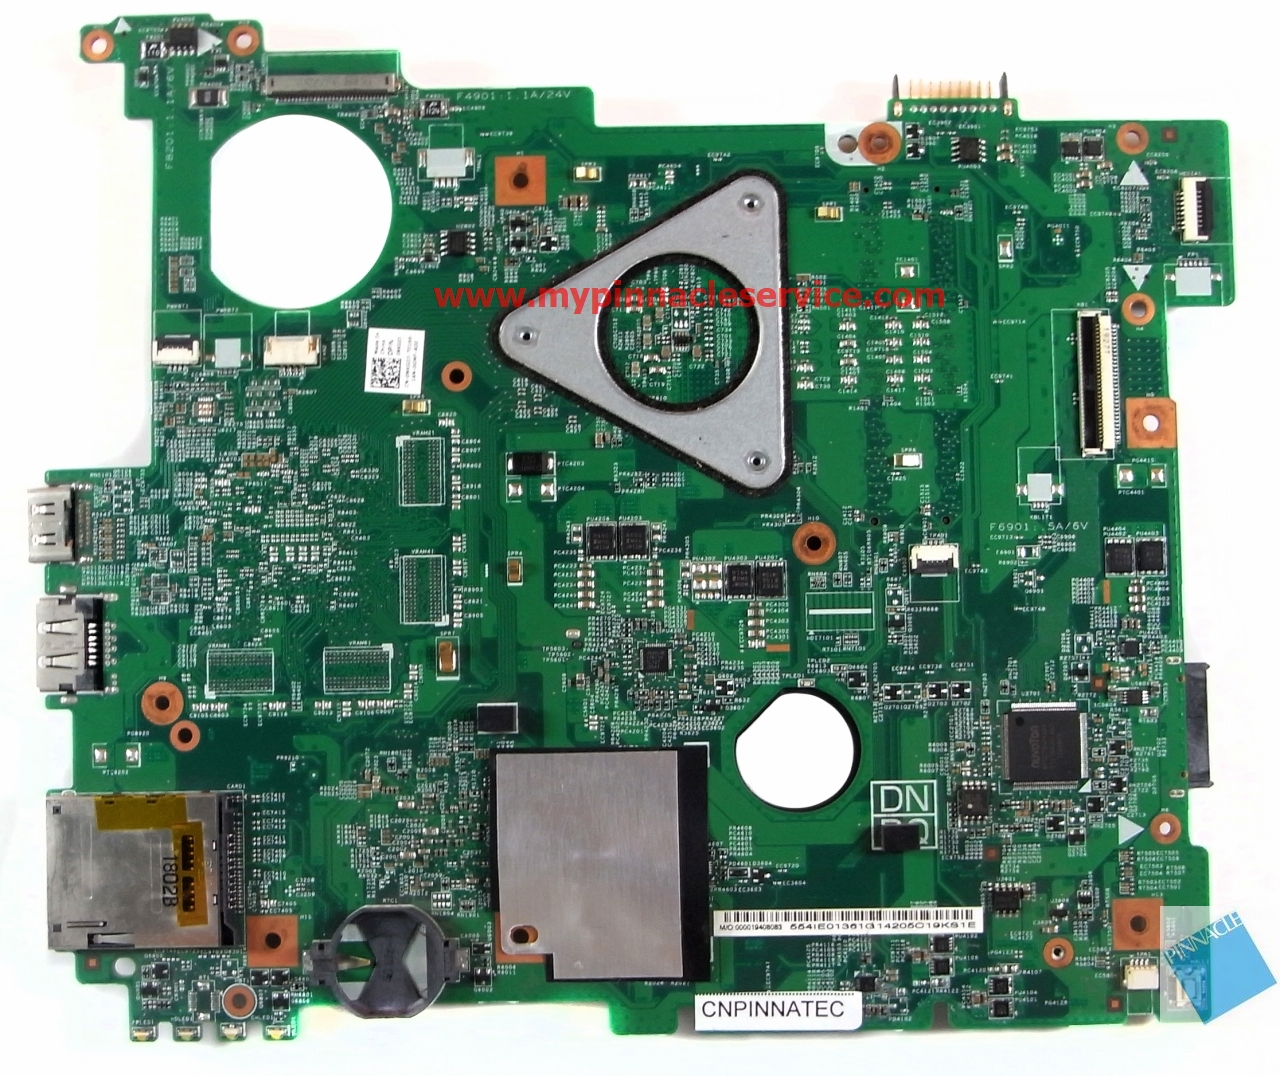 0nkg03-nkg03-mainboard-for-dell-inspiron-15r-m5110-55.4ie01.361-rimg0202.jpg